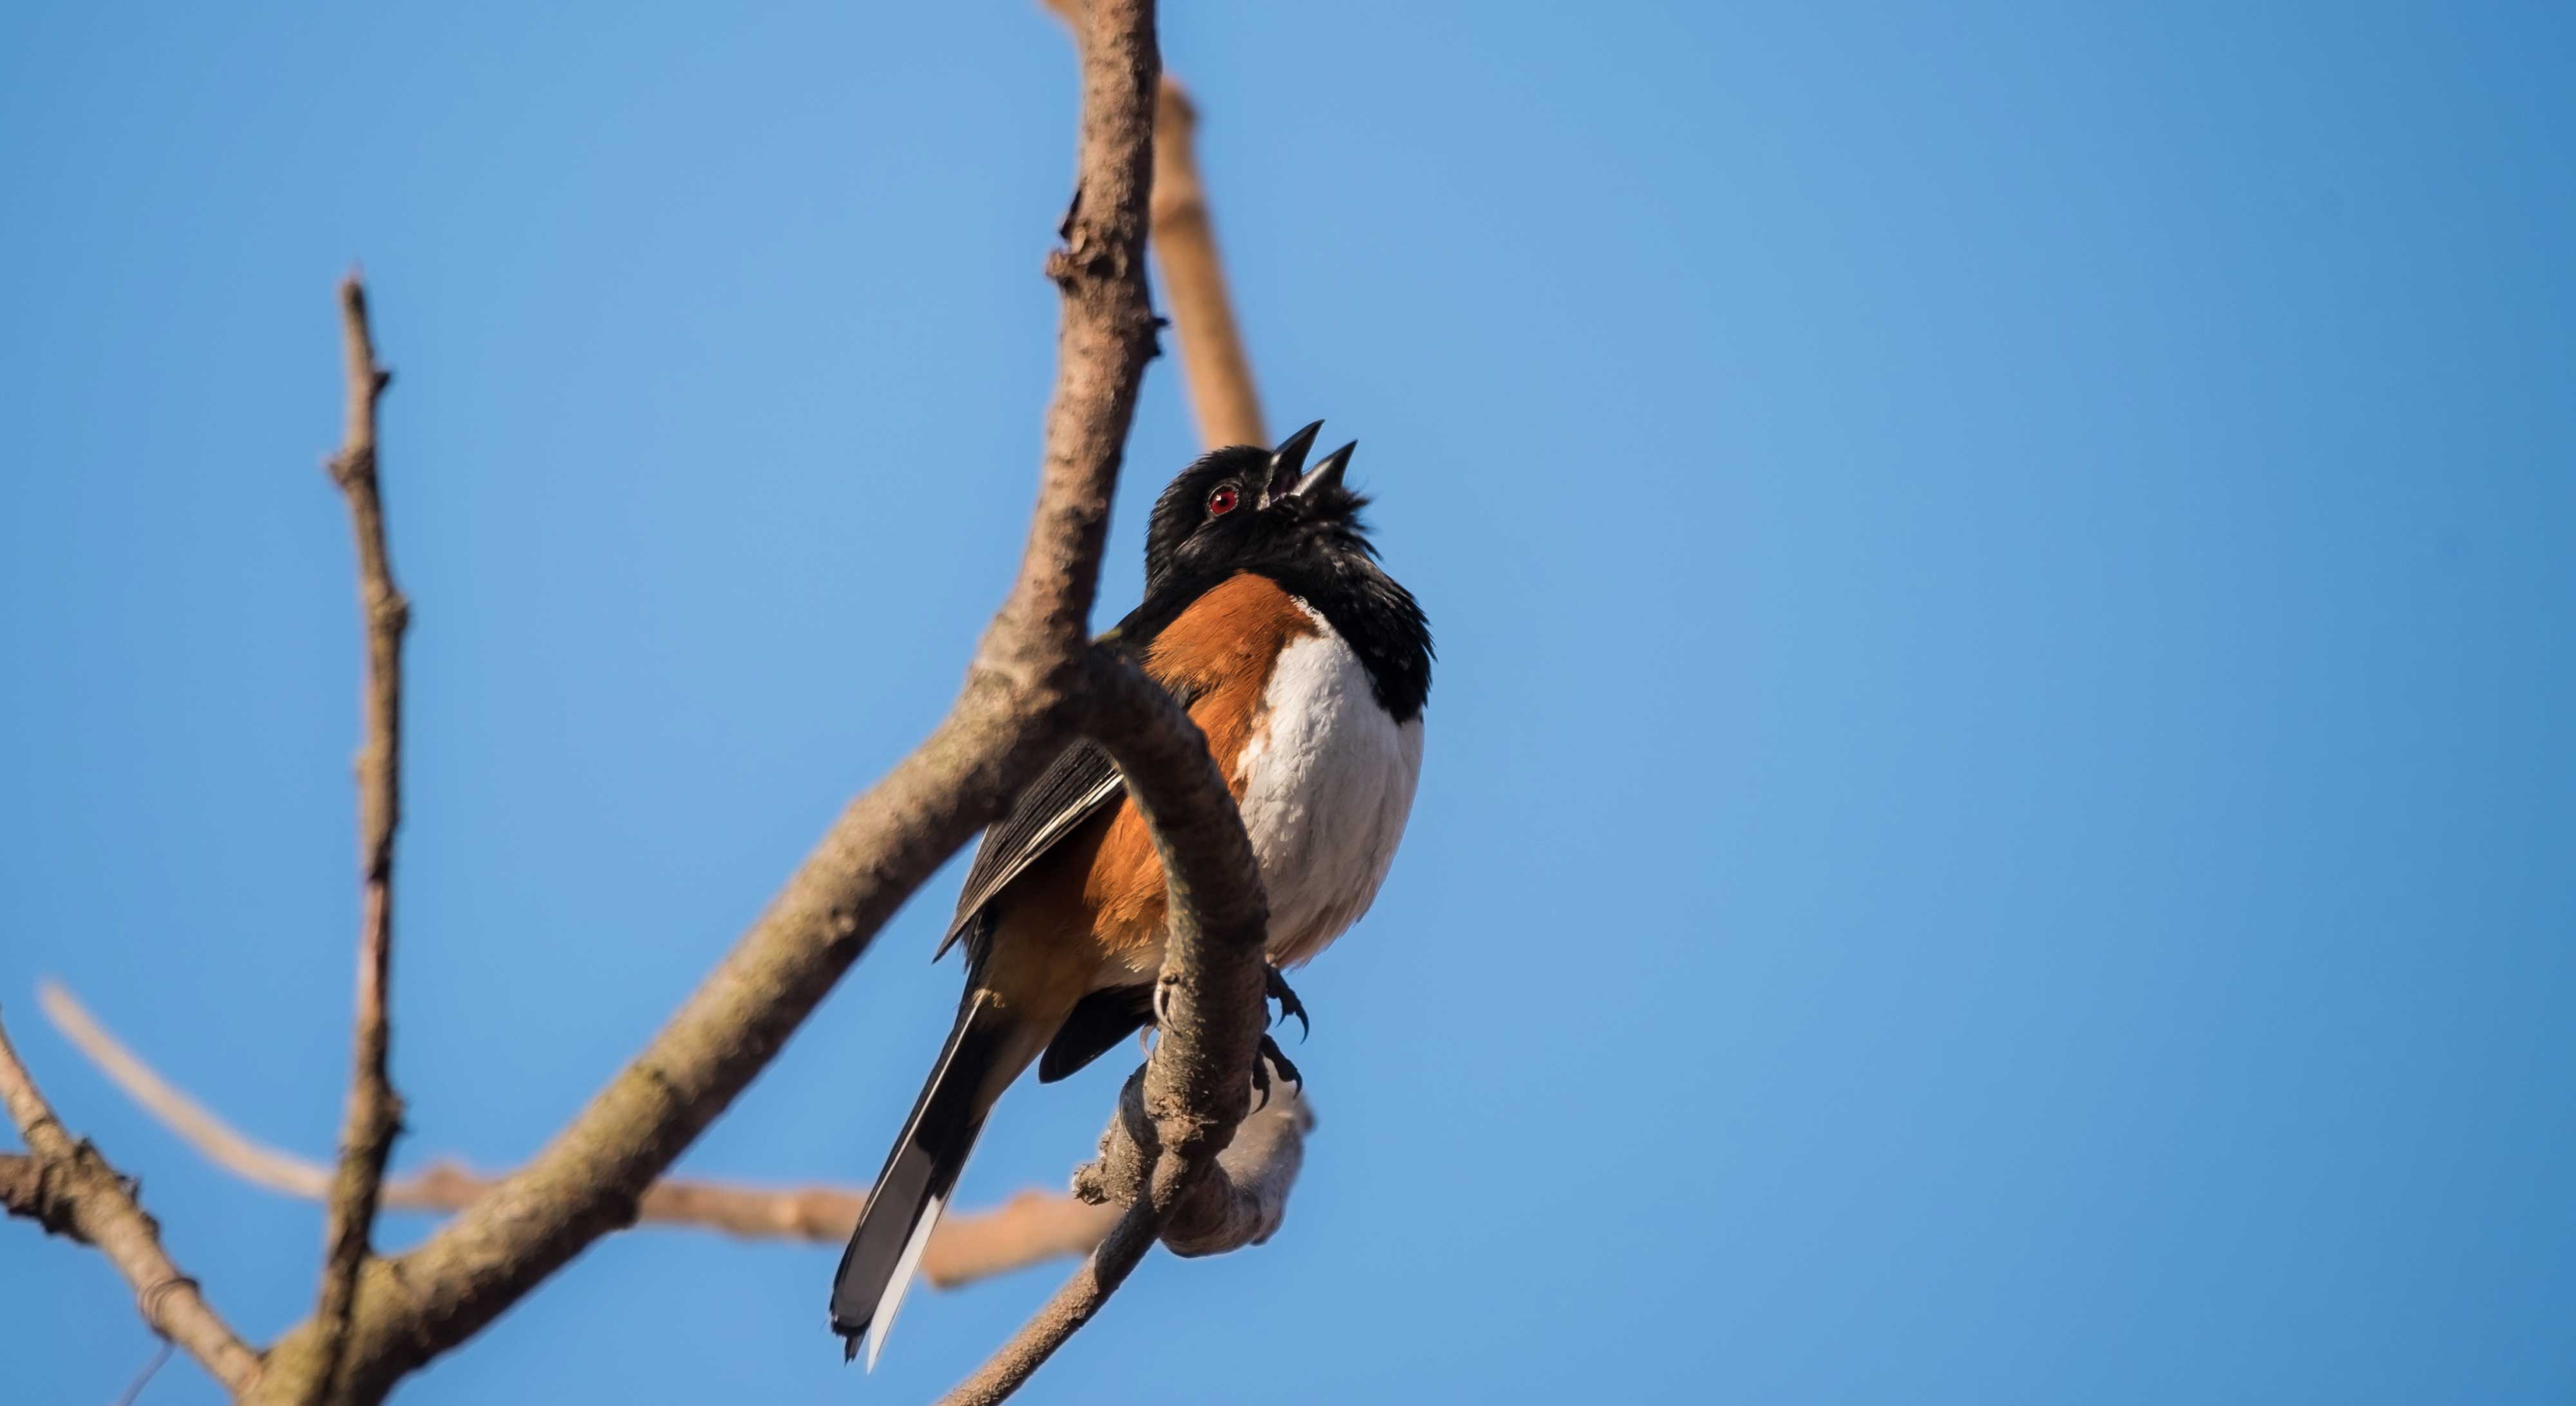 An eastern towhee on a branch.